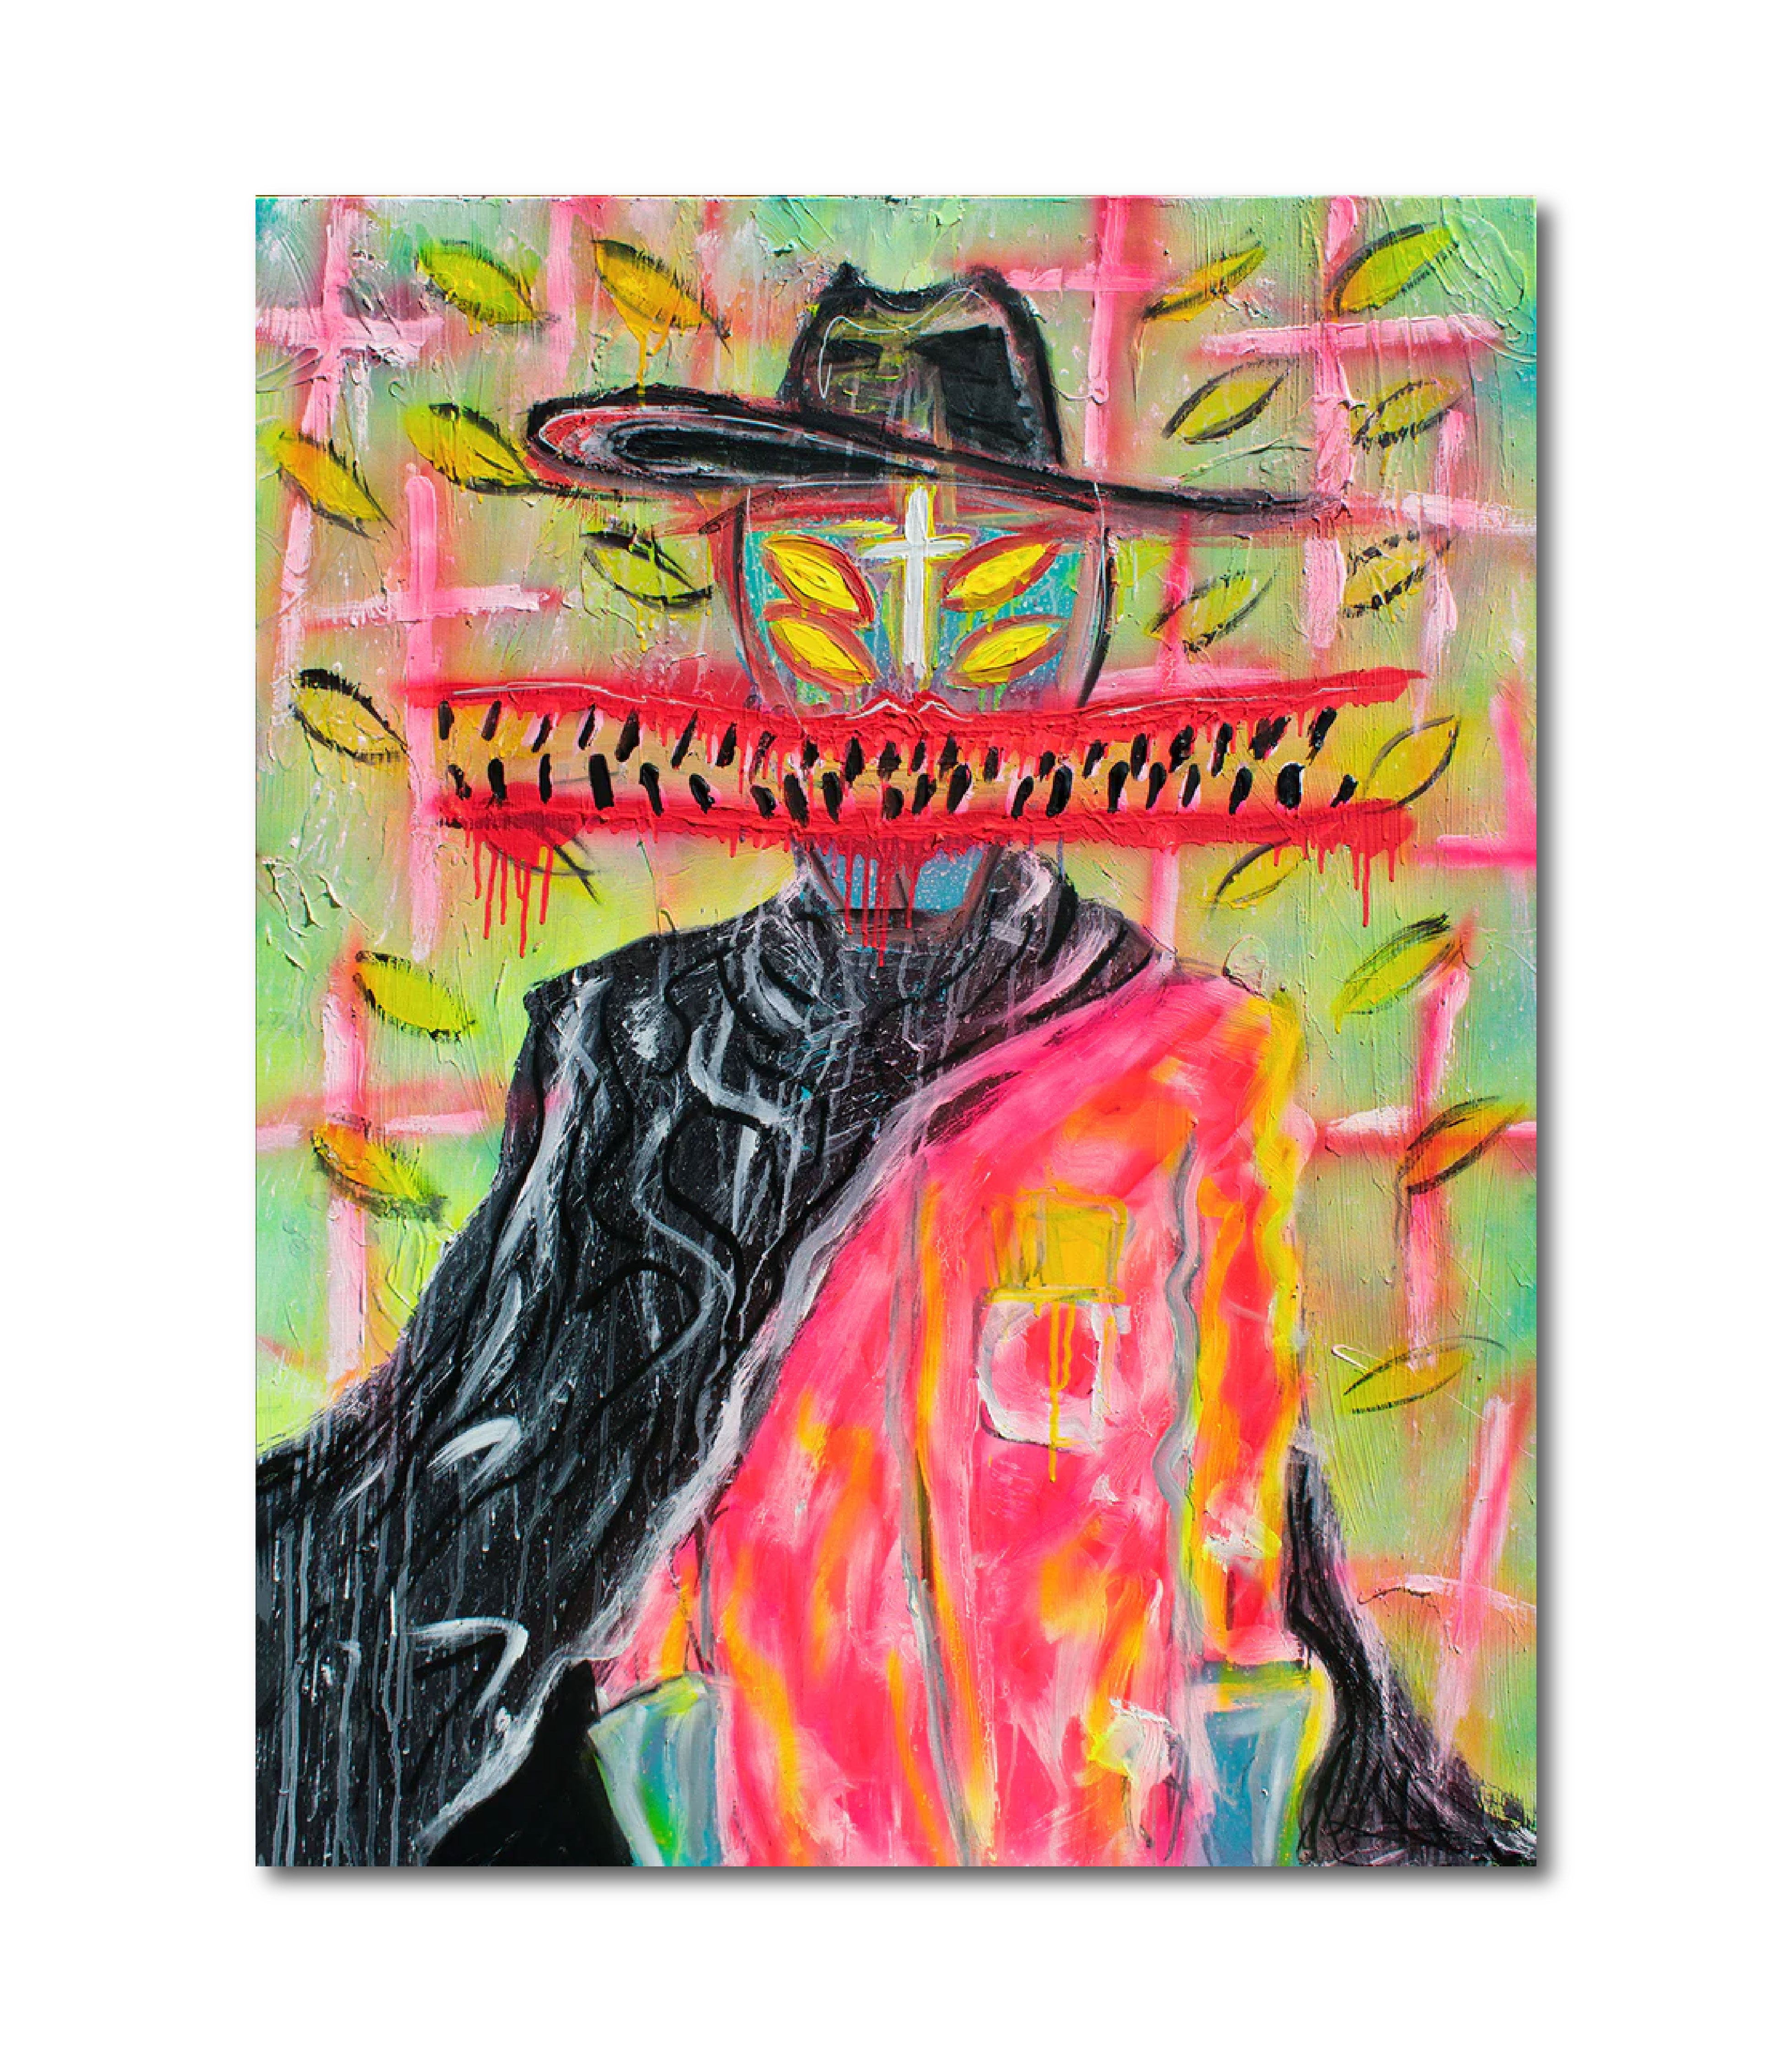 'THE COWBOY' - Acrylic and Mixed Media on Canvas